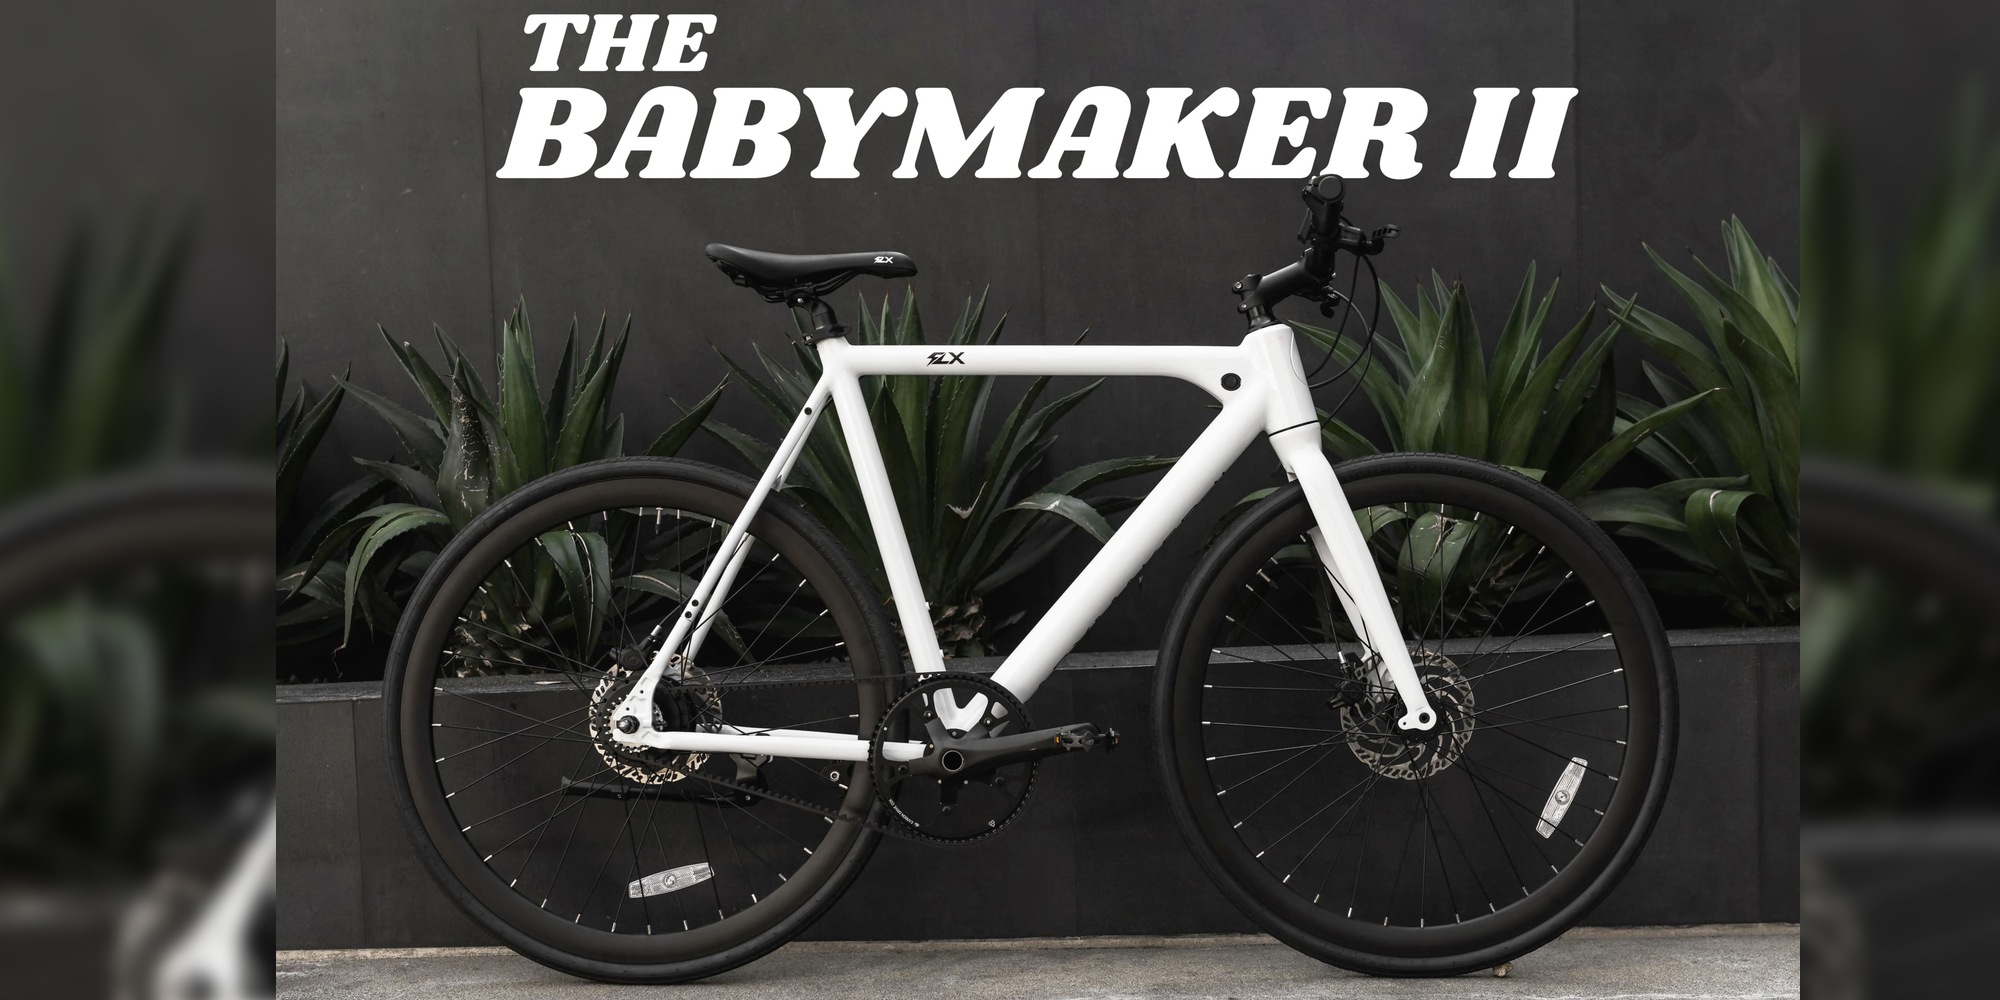 The Babymaker Electric Bike Is Back Again After Pulling In $13M In Sales